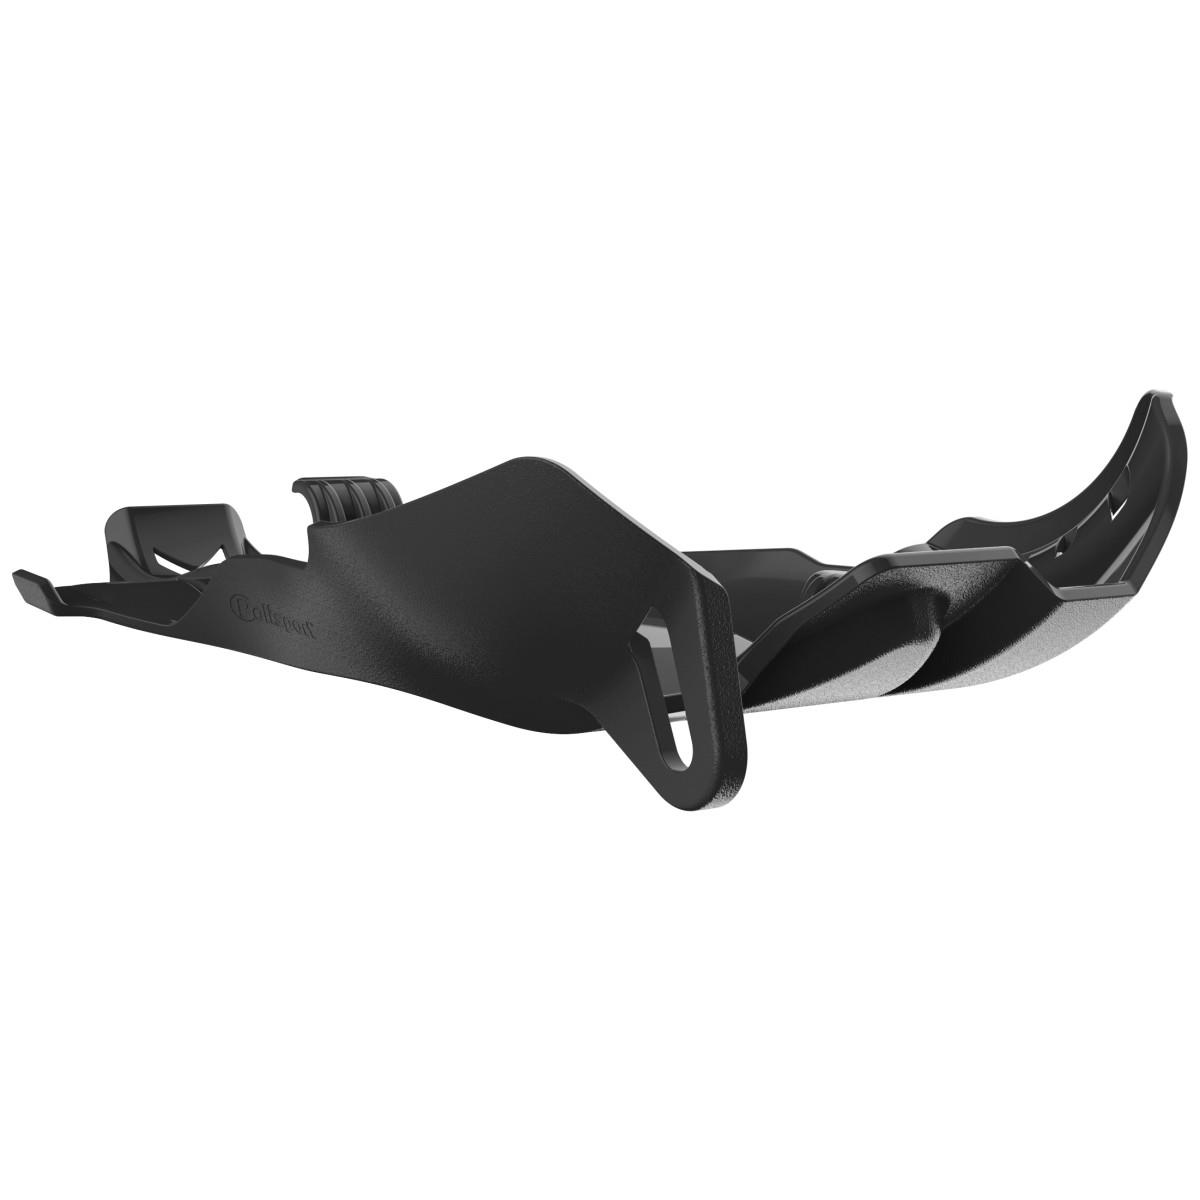 Polisport Skid plate with deflection protection Fortress KTM SX 06-16, Black